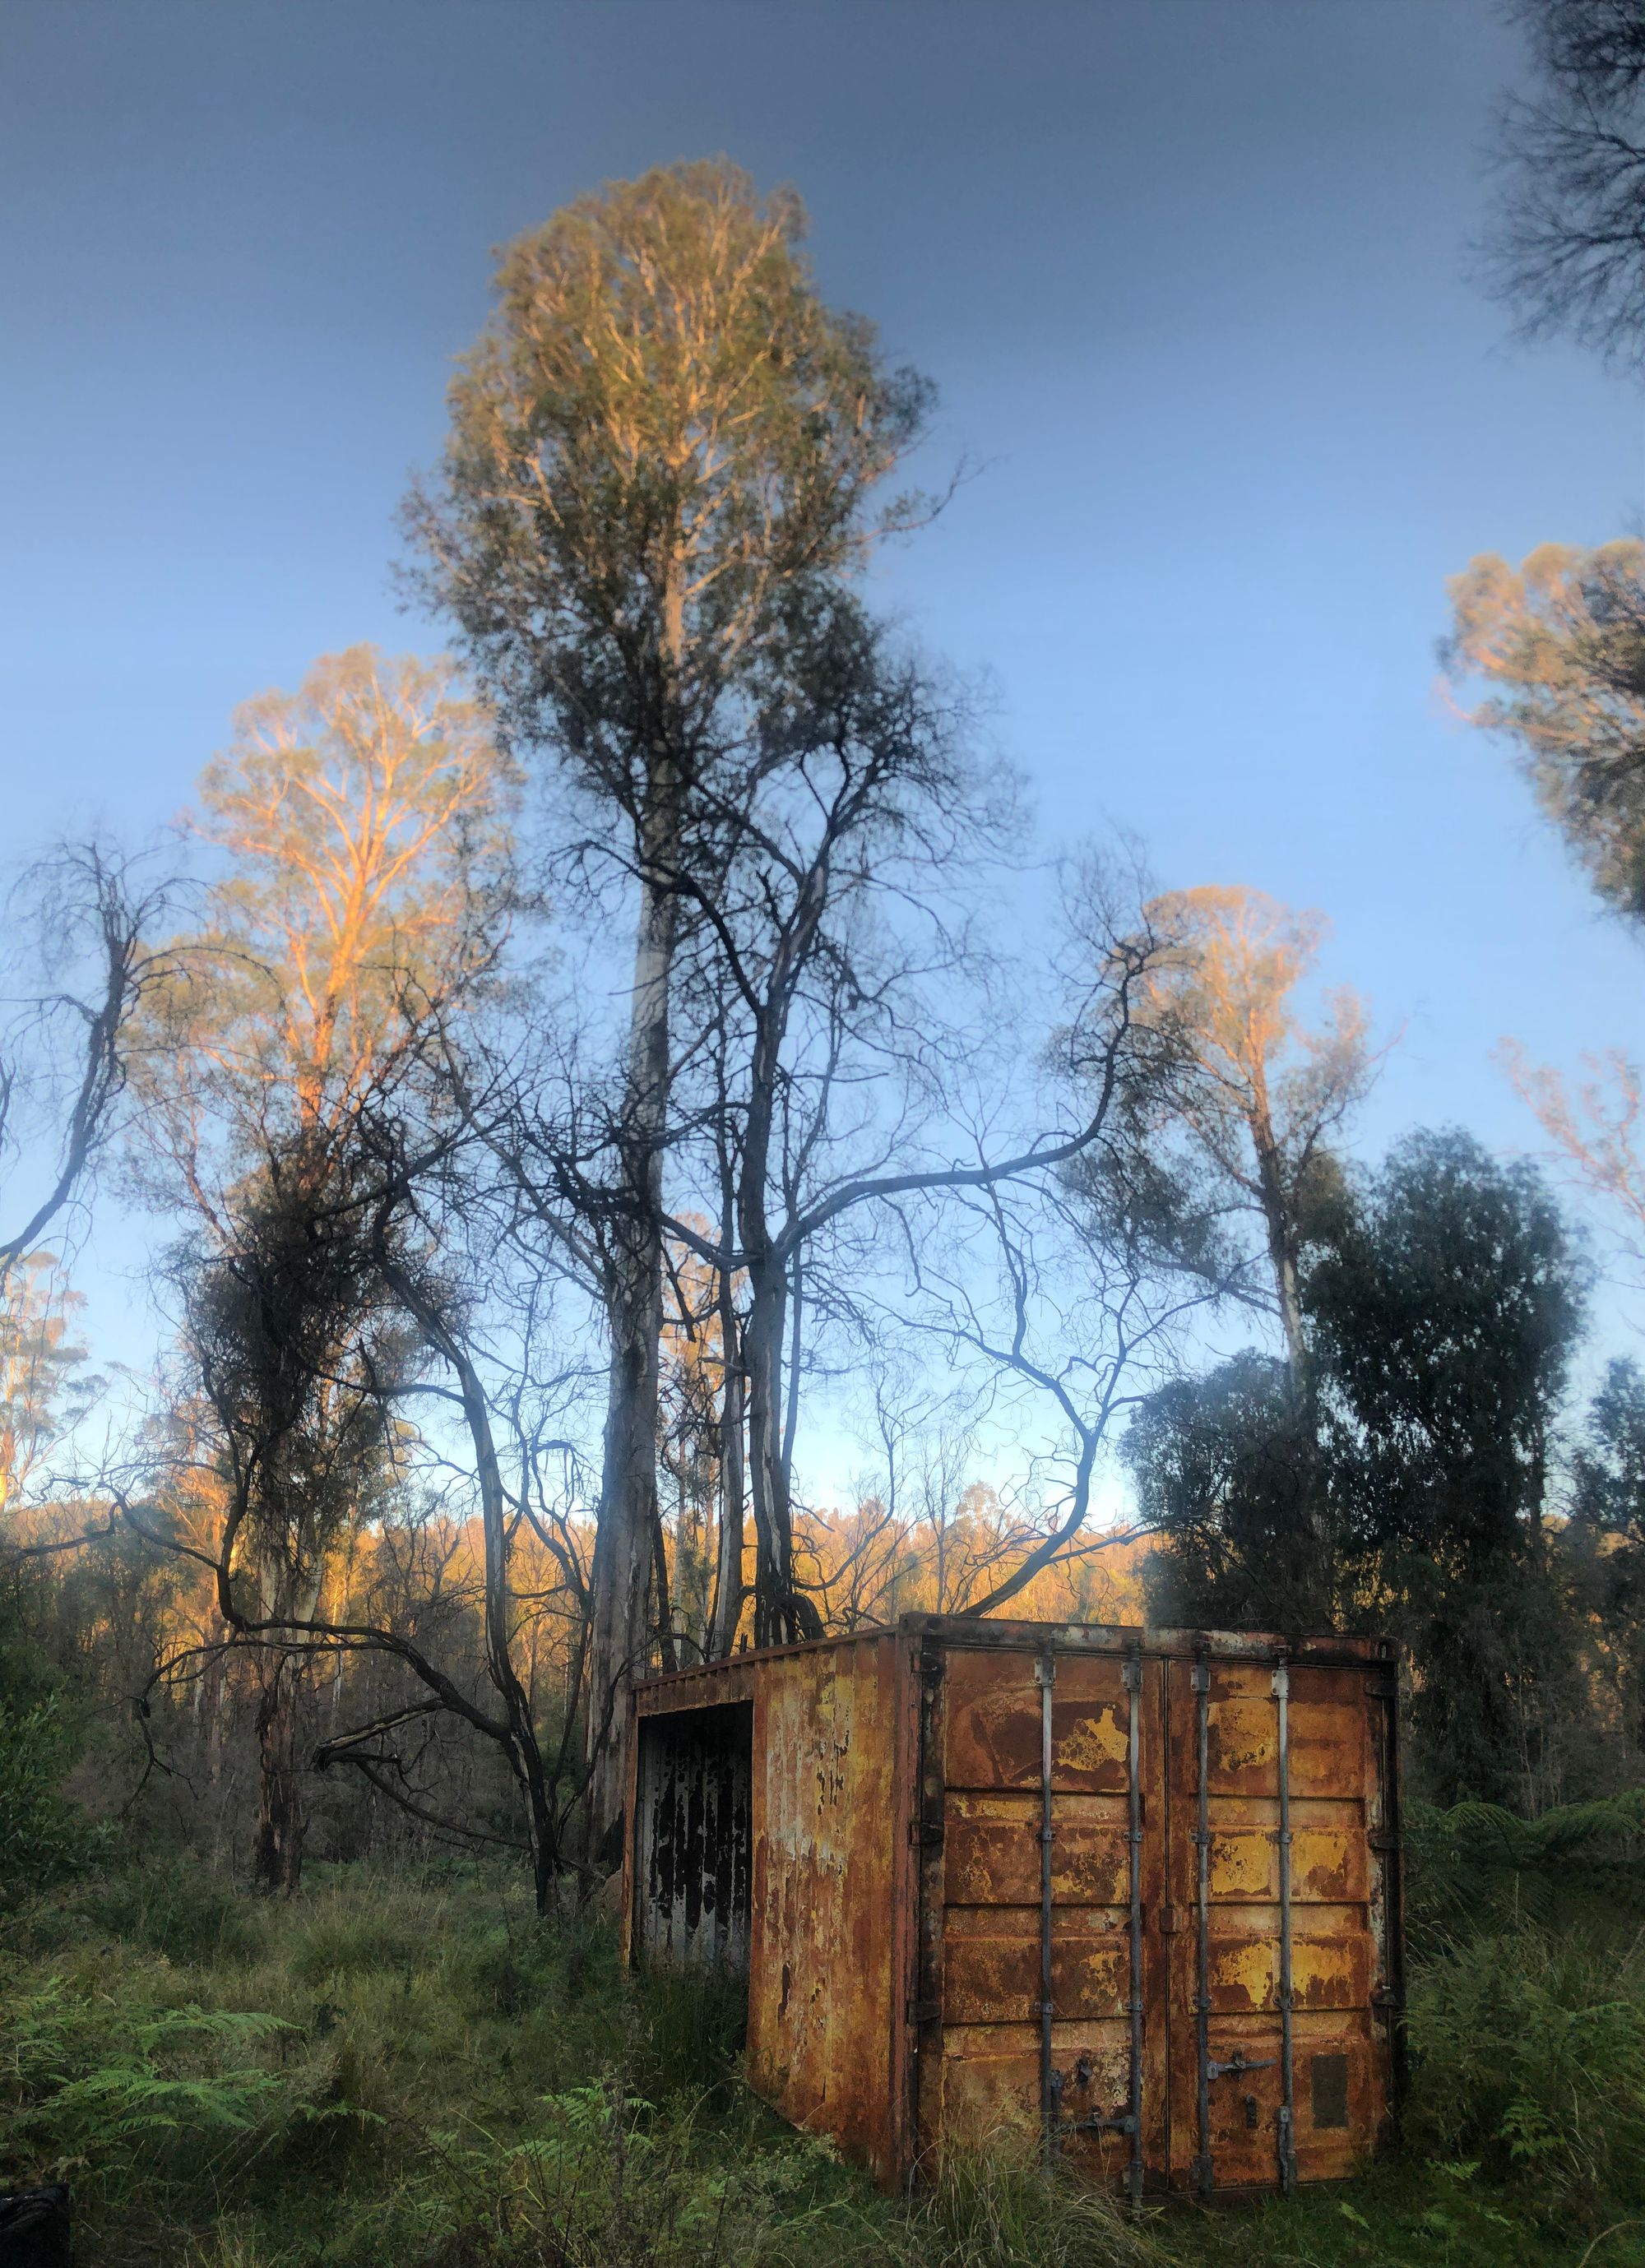 Our friend's burnt out container home in the foreground with burnt gum trees in the background